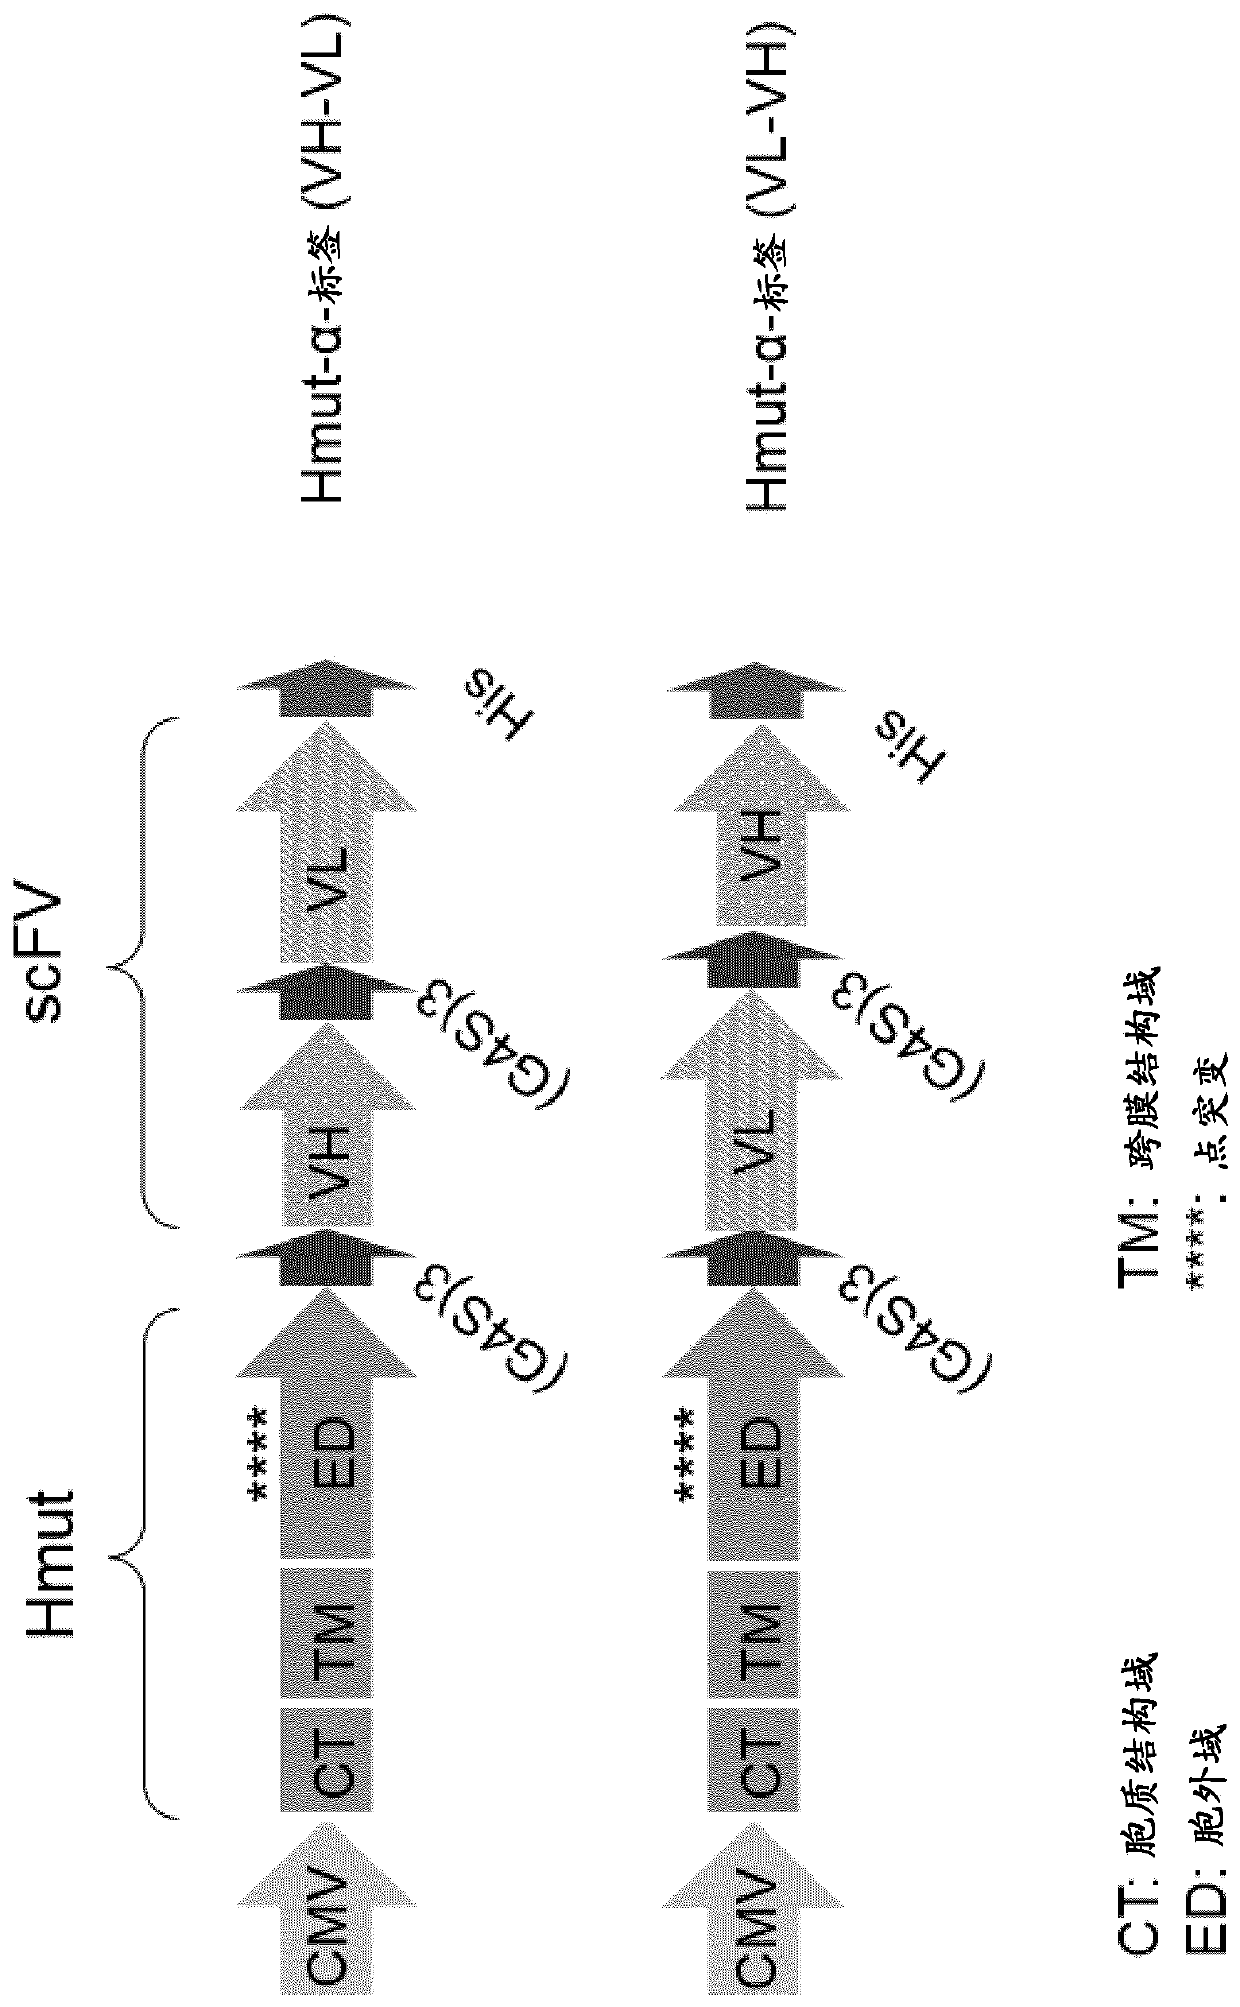 Adapter-based retroviral vector system for the selective transduction of target cells